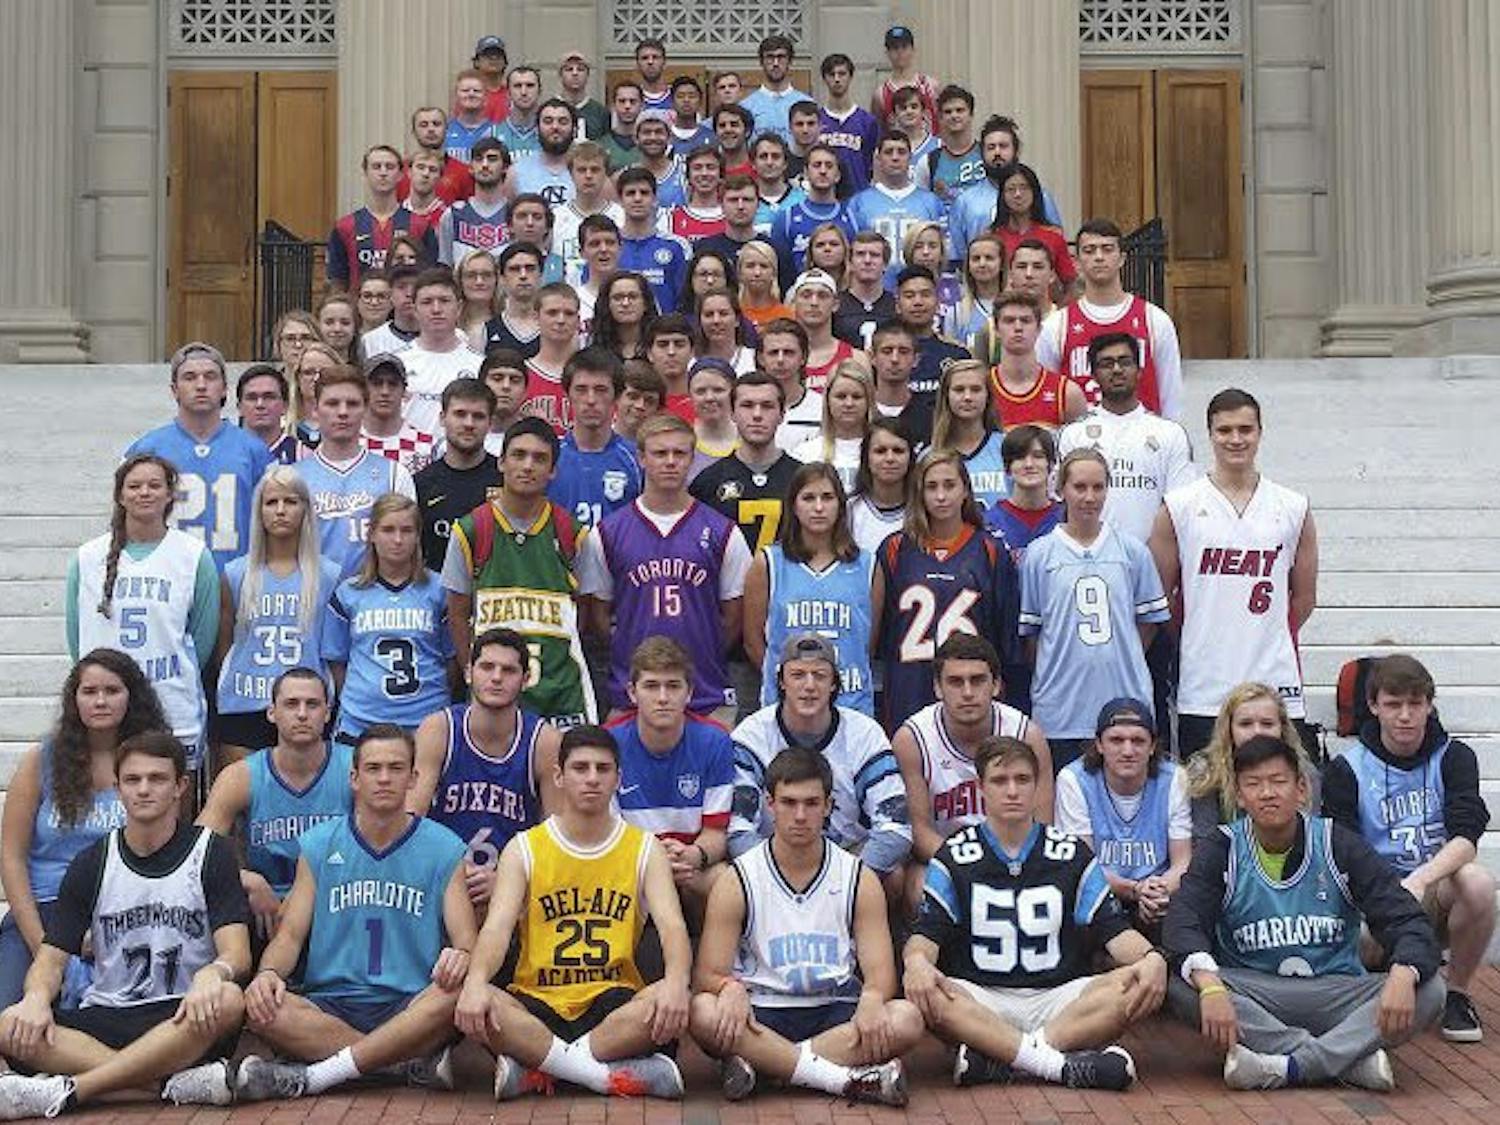 Students meet on Thursdays outside Wilson Library to celebrate Jersday by wearing sports jerseys.